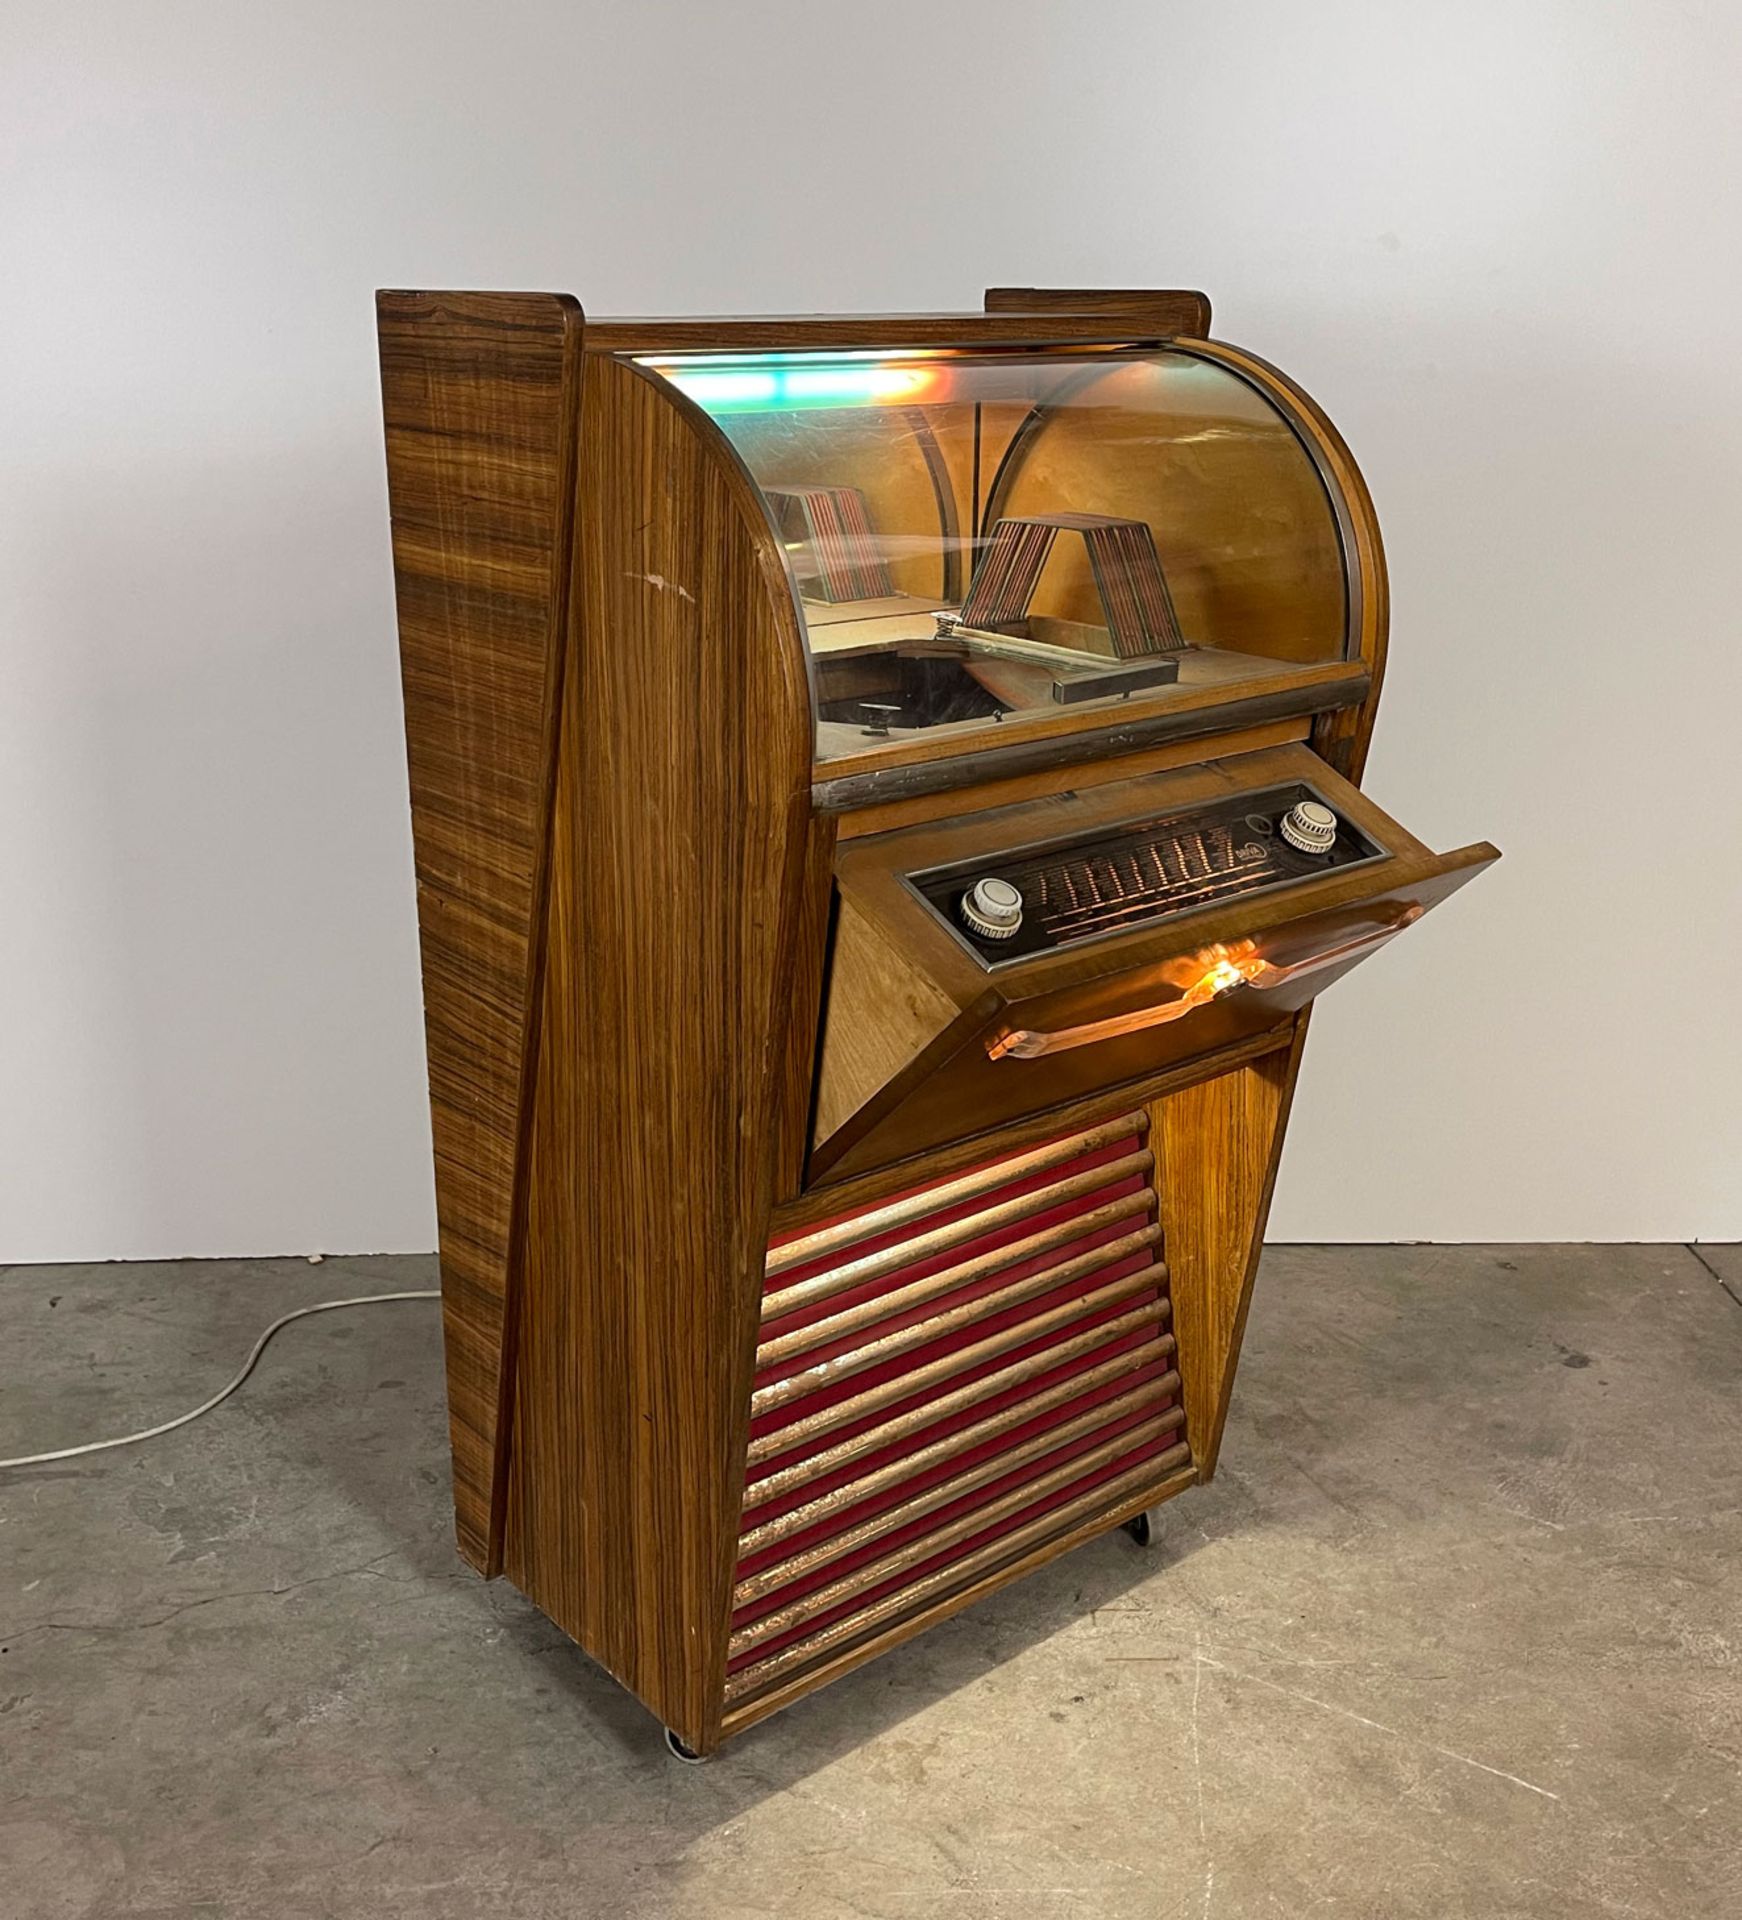 1958 Belgian Driva "Brabant Box" Coin-Op Radio and Record Player Jukebox - Image 3 of 14